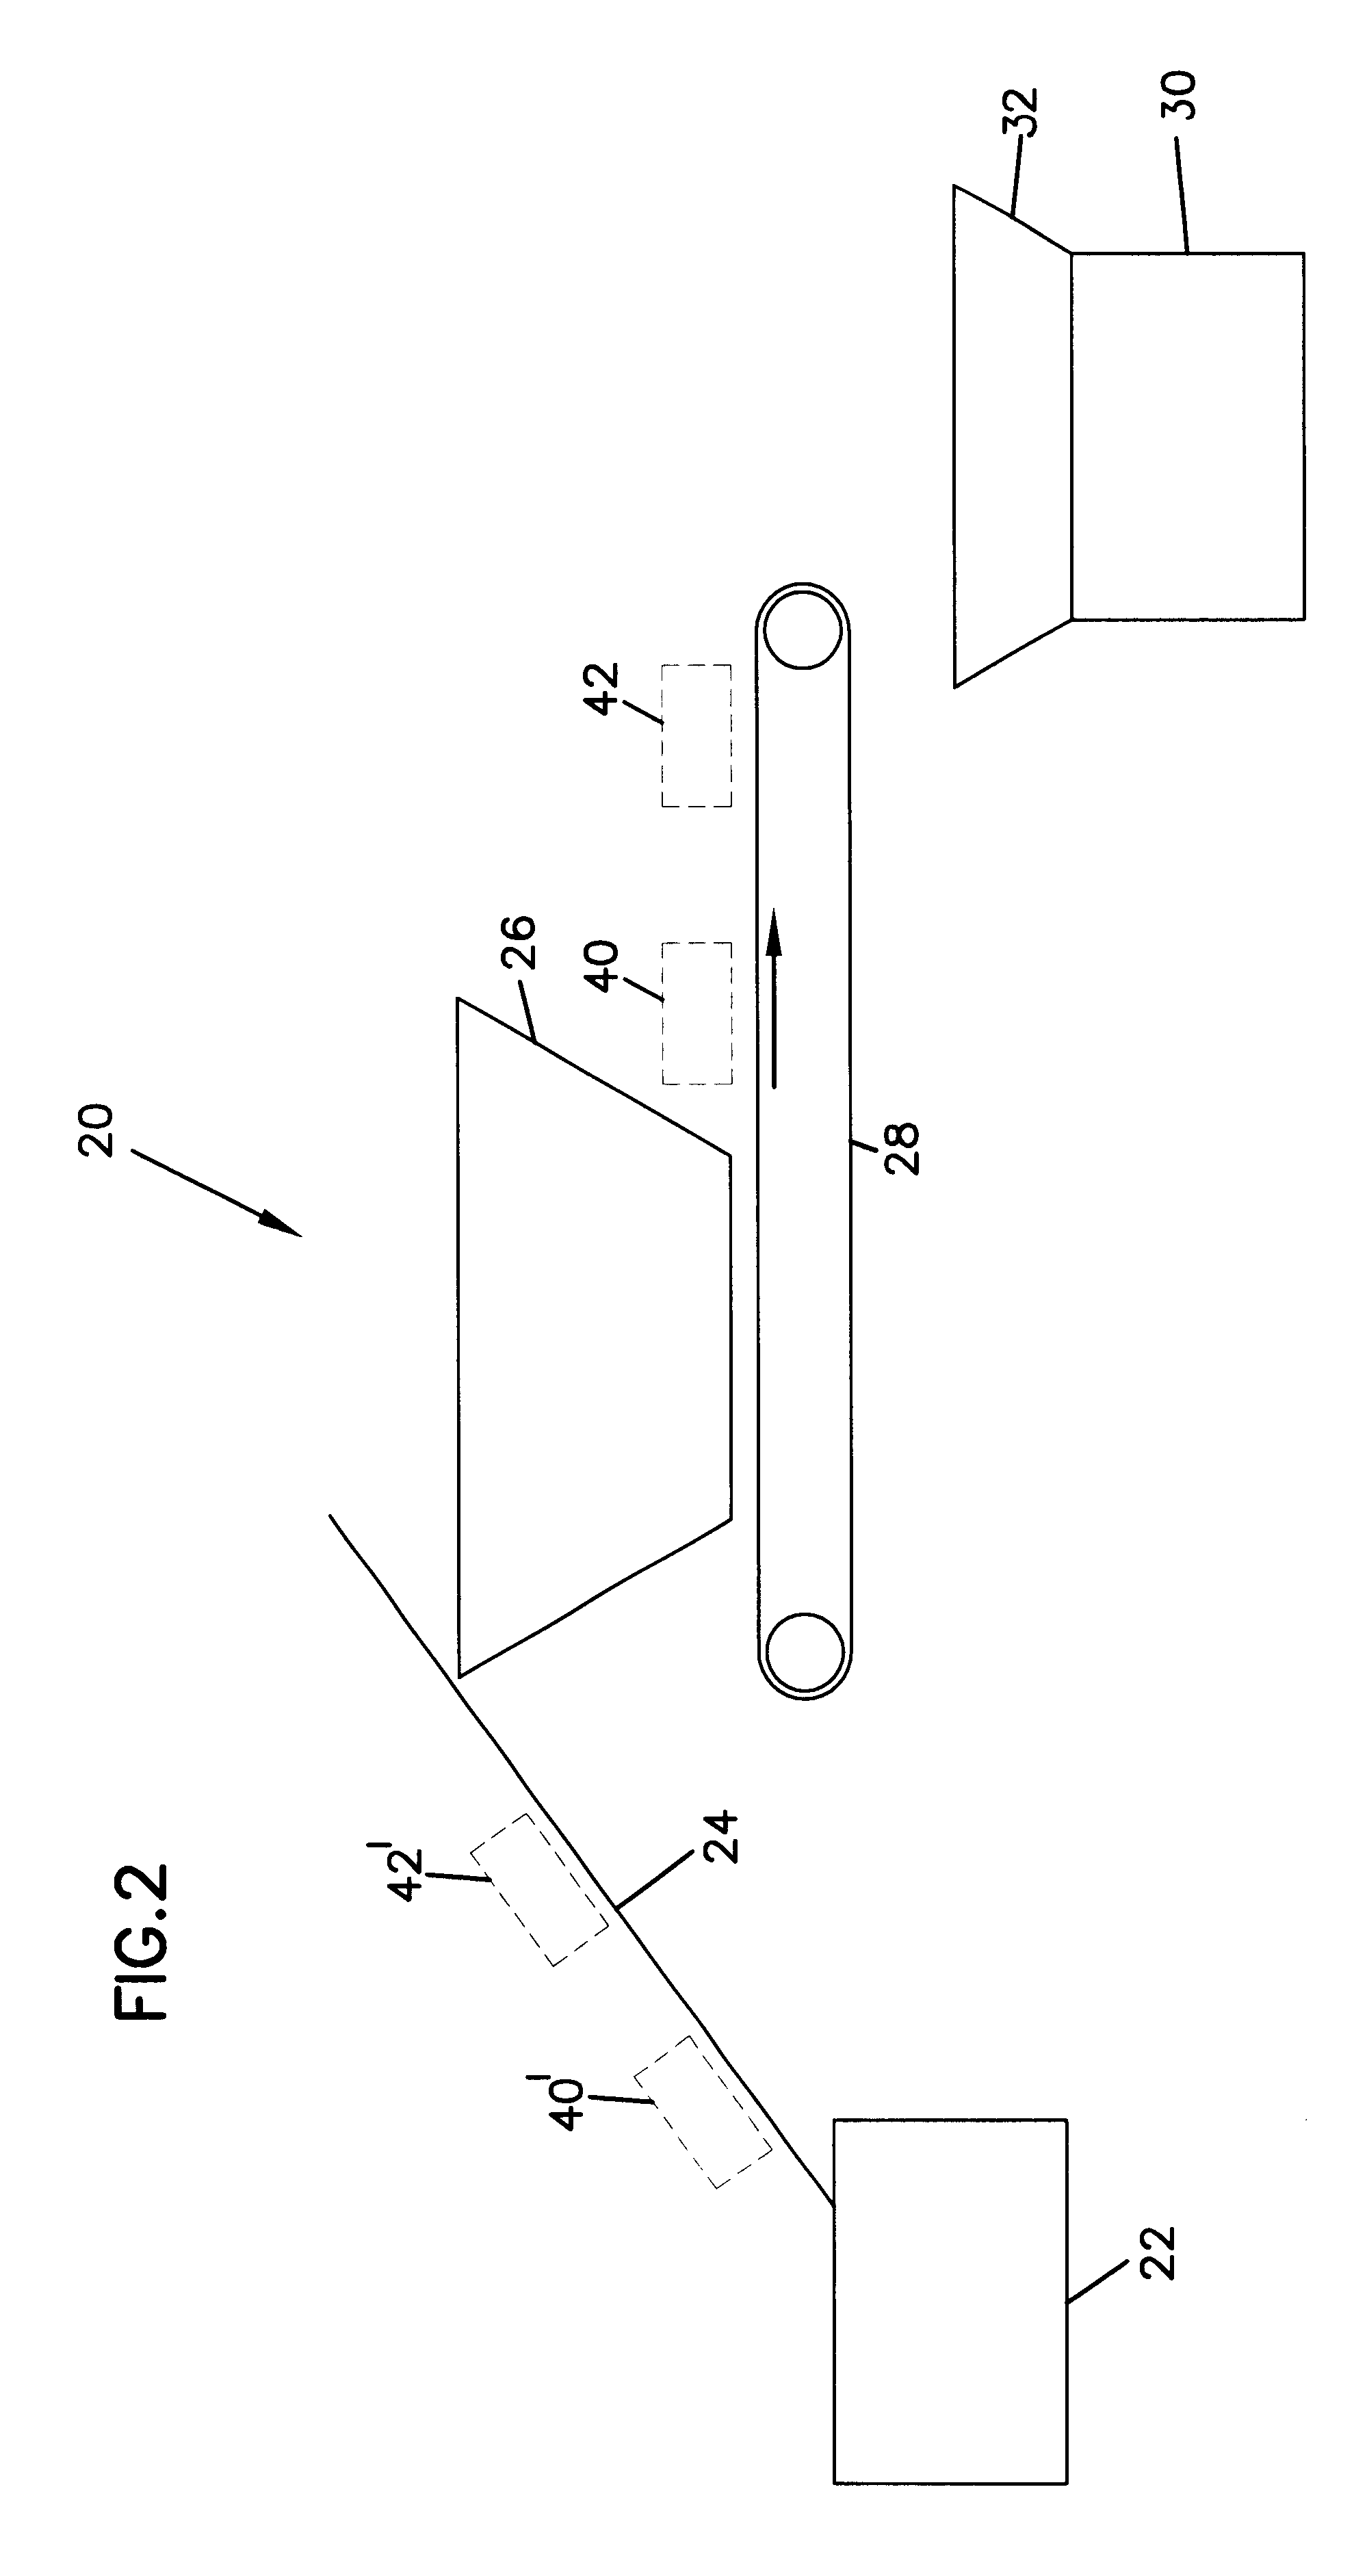 Process and equipment for producing concrete products having blended colors